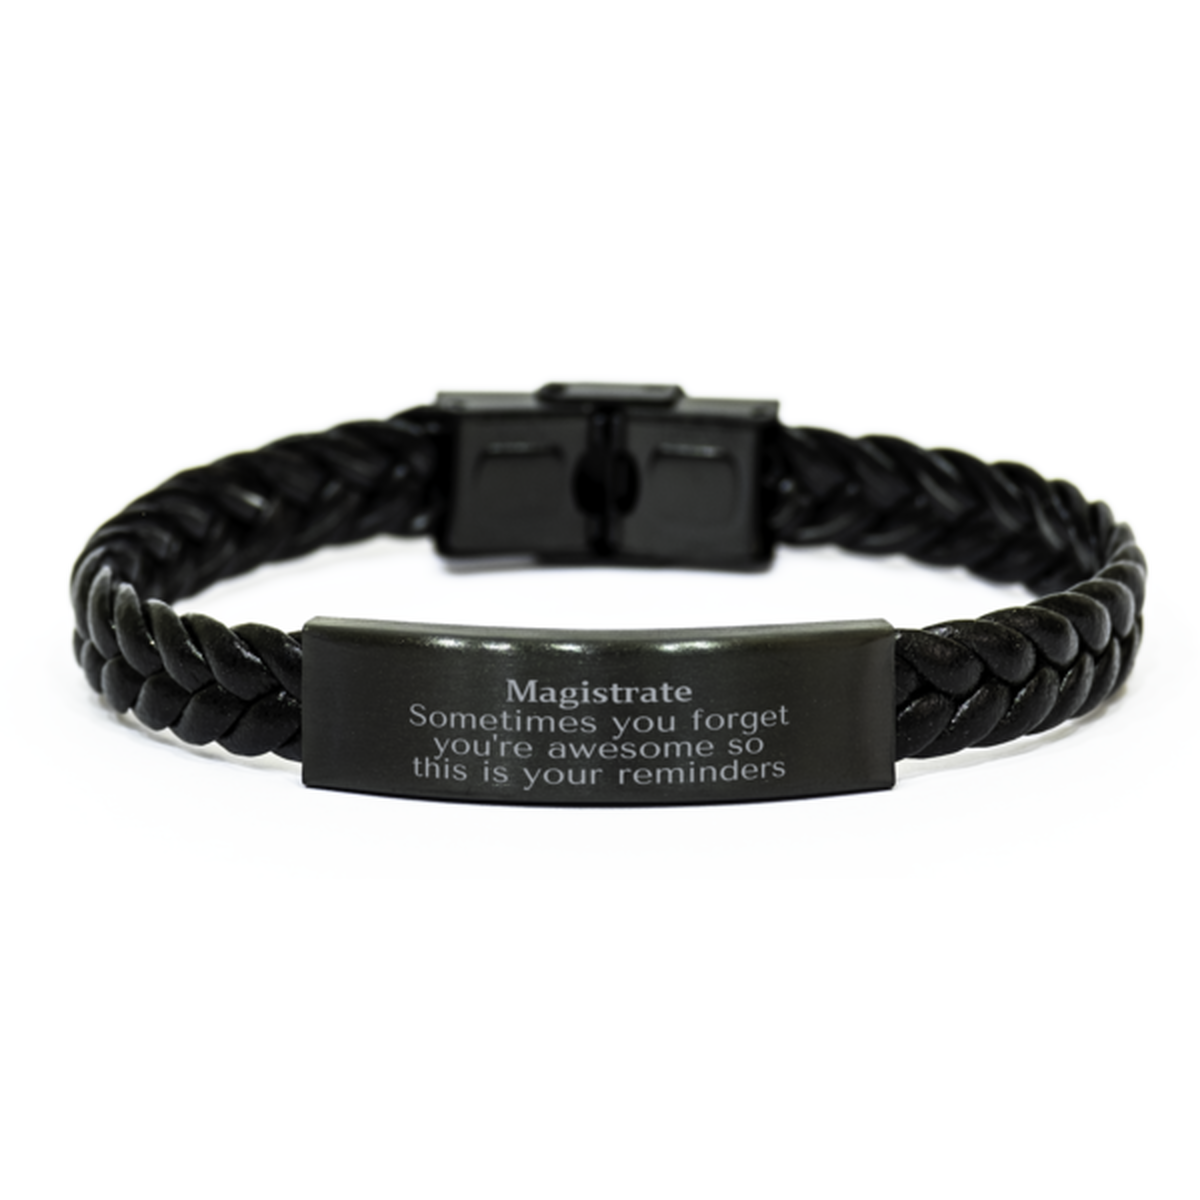 Sentimental Magistrate Braided Leather Bracelet, Magistrate Sometimes you forget you're awesome so this is your reminders, Graduation Christmas Birthday Gifts for Magistrate, Men, Women, Coworkers